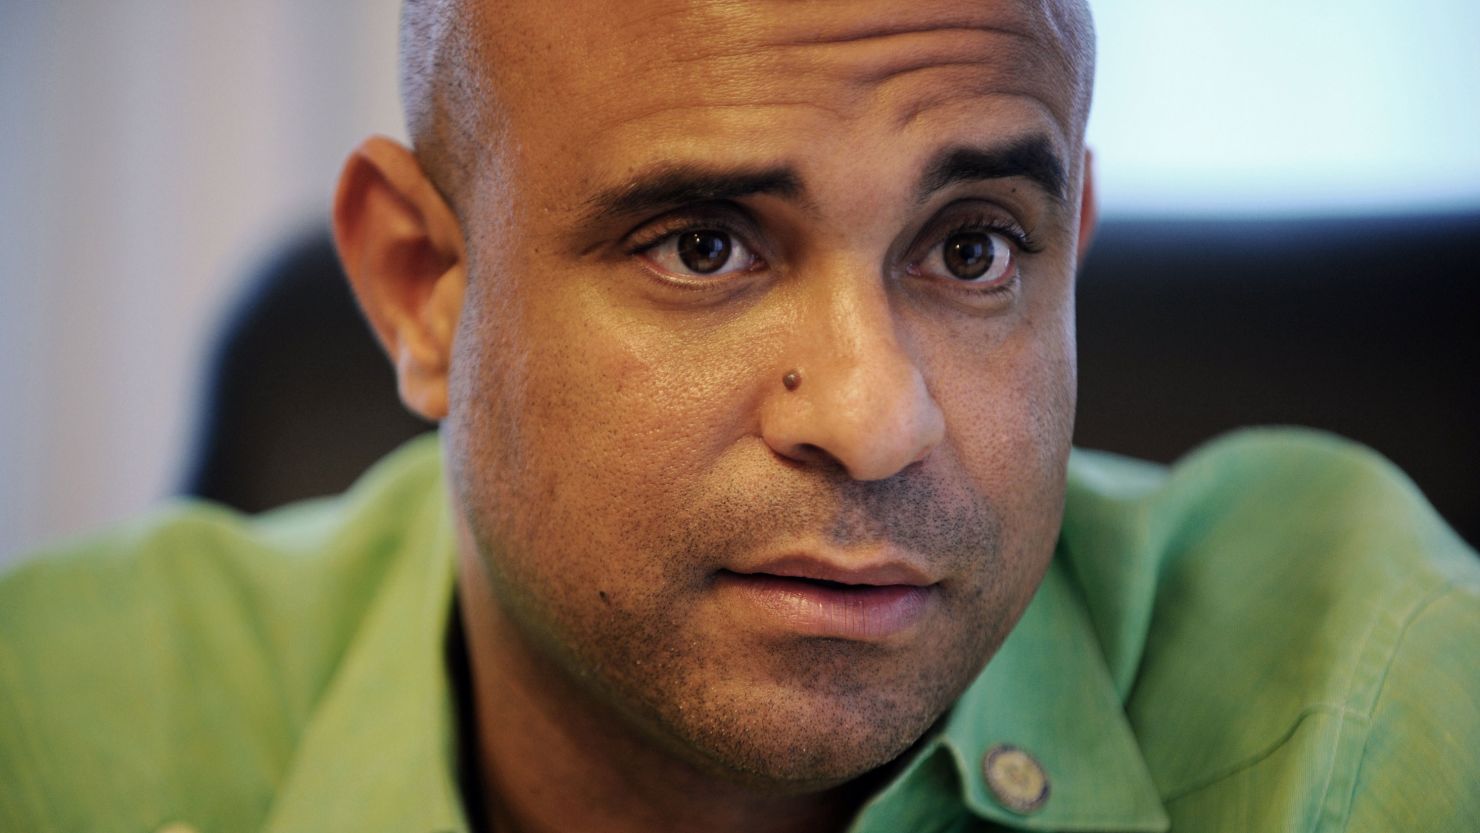 Laurent Lamothe speaks during an interview with AFP on July 3, 2014, in Port-au-Prince, Haiti.